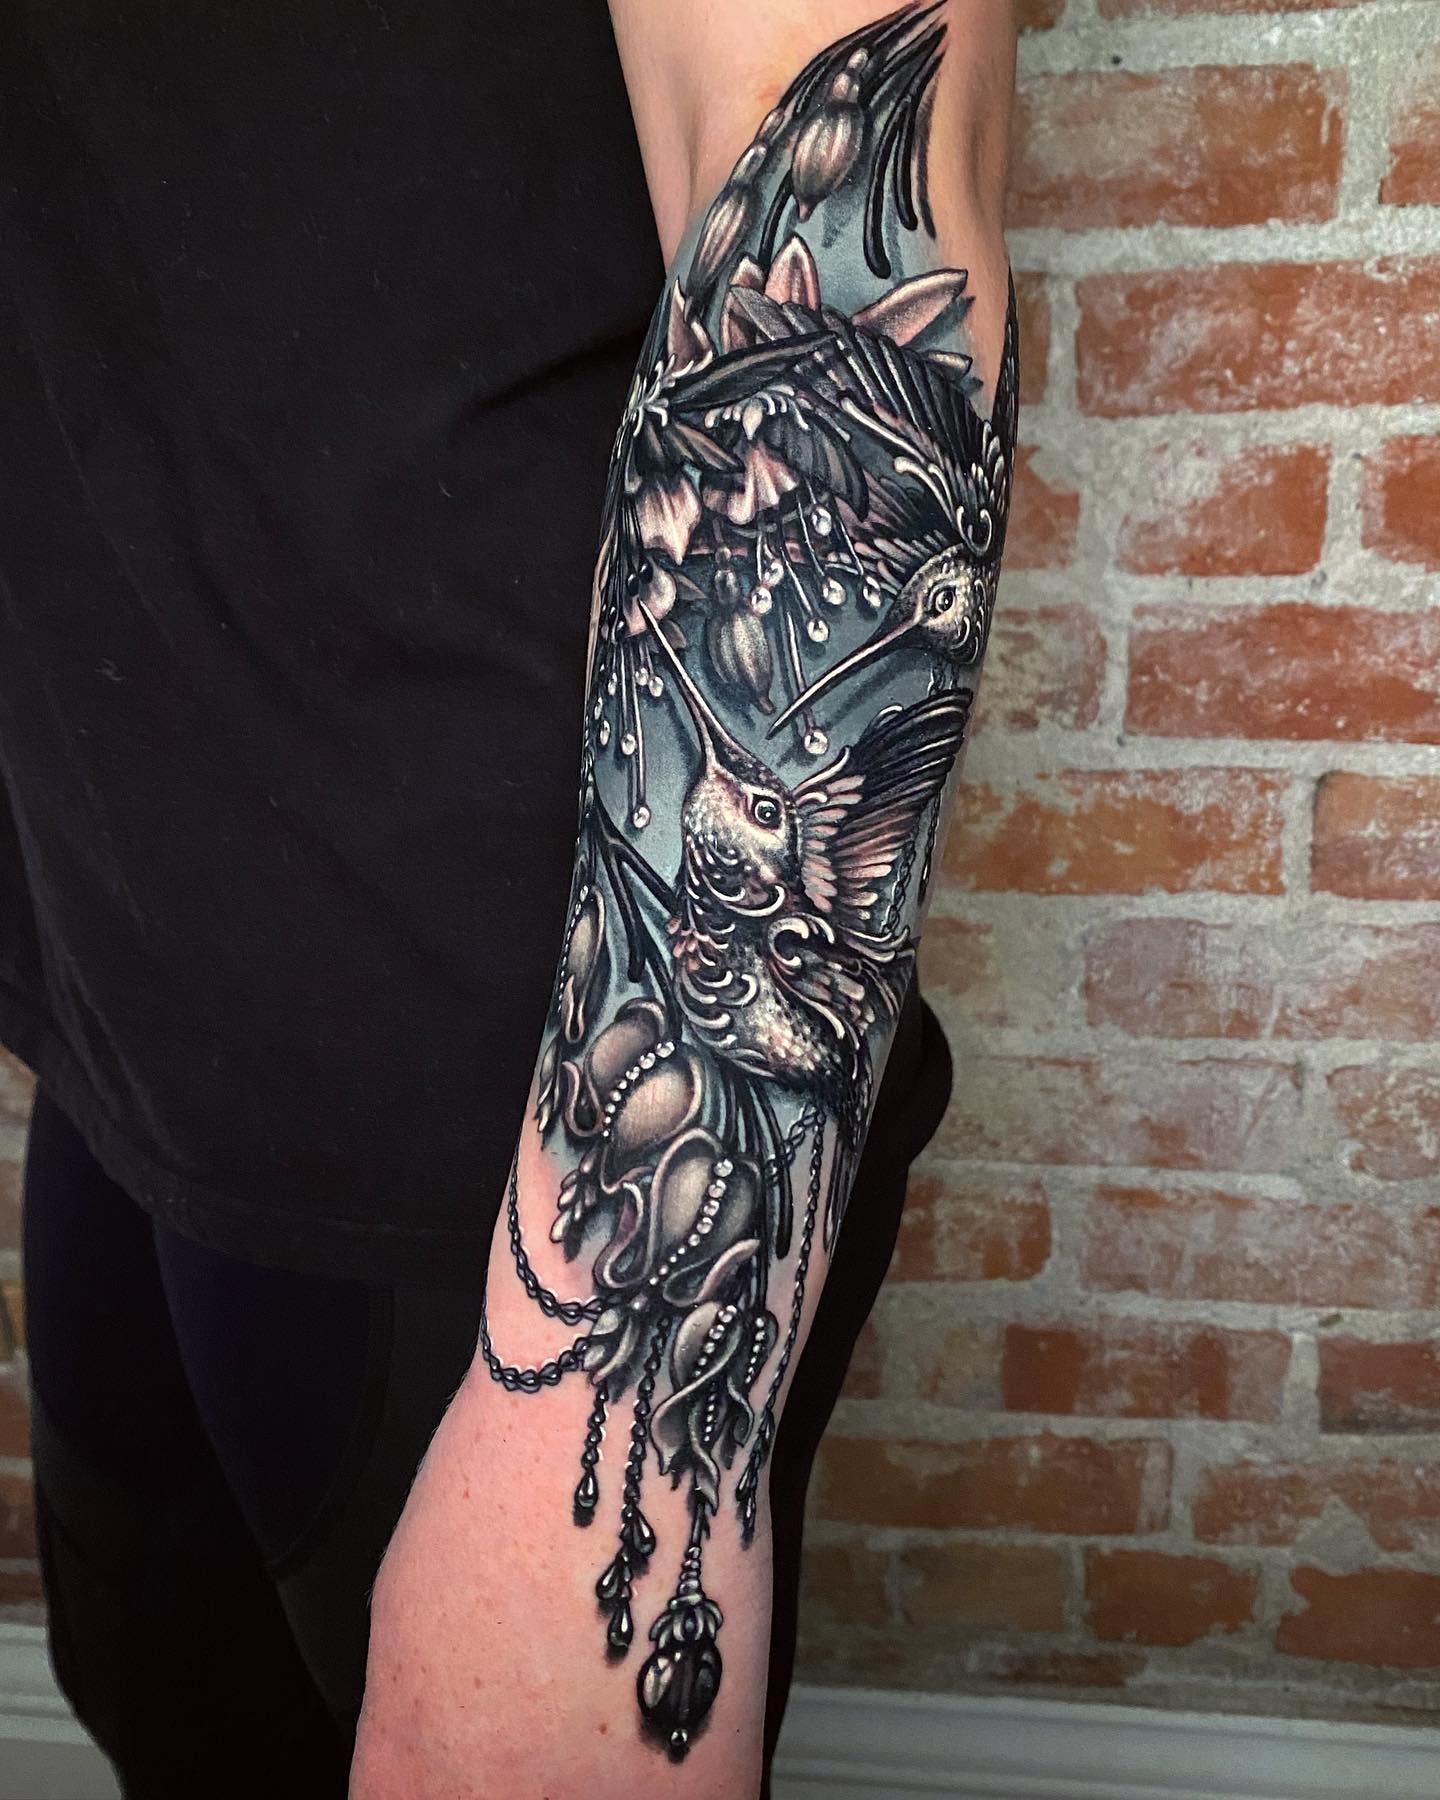 Double magnolias (forearm) by D'Lacie Jeanne at Broadleaf Studio in  Portland, OR : r/tattoos